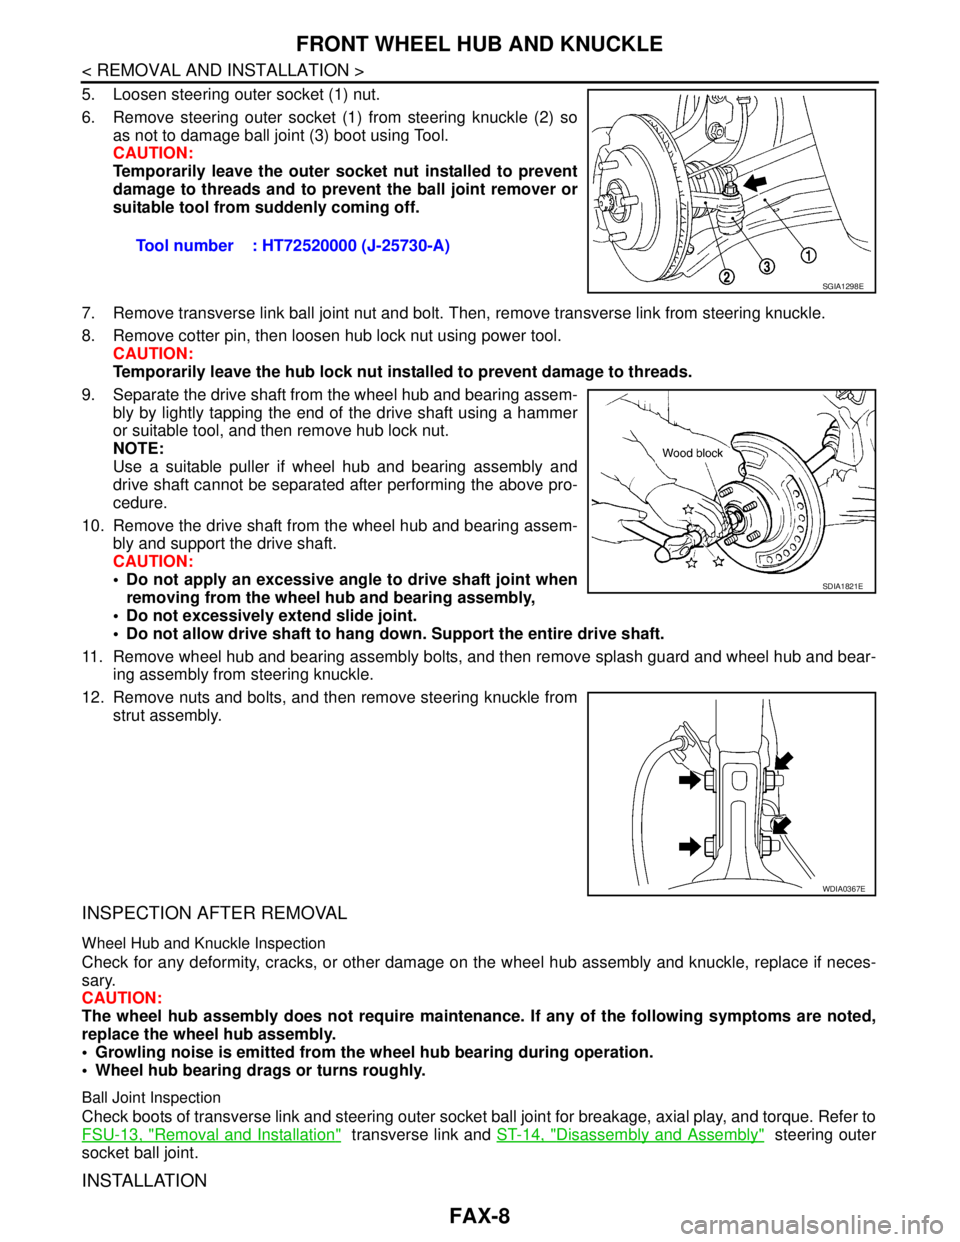 NISSAN TIIDA 2007  Service Repair Manual FAX-8
< REMOVAL AND INSTALLATION >
FRONT WHEEL HUB AND KNUCKLE
5. Loosen steering outer socket (1) nut.
6. Remove steering outer socket (1) from steering knuckle (2) so
as not to damage ball joint (3)